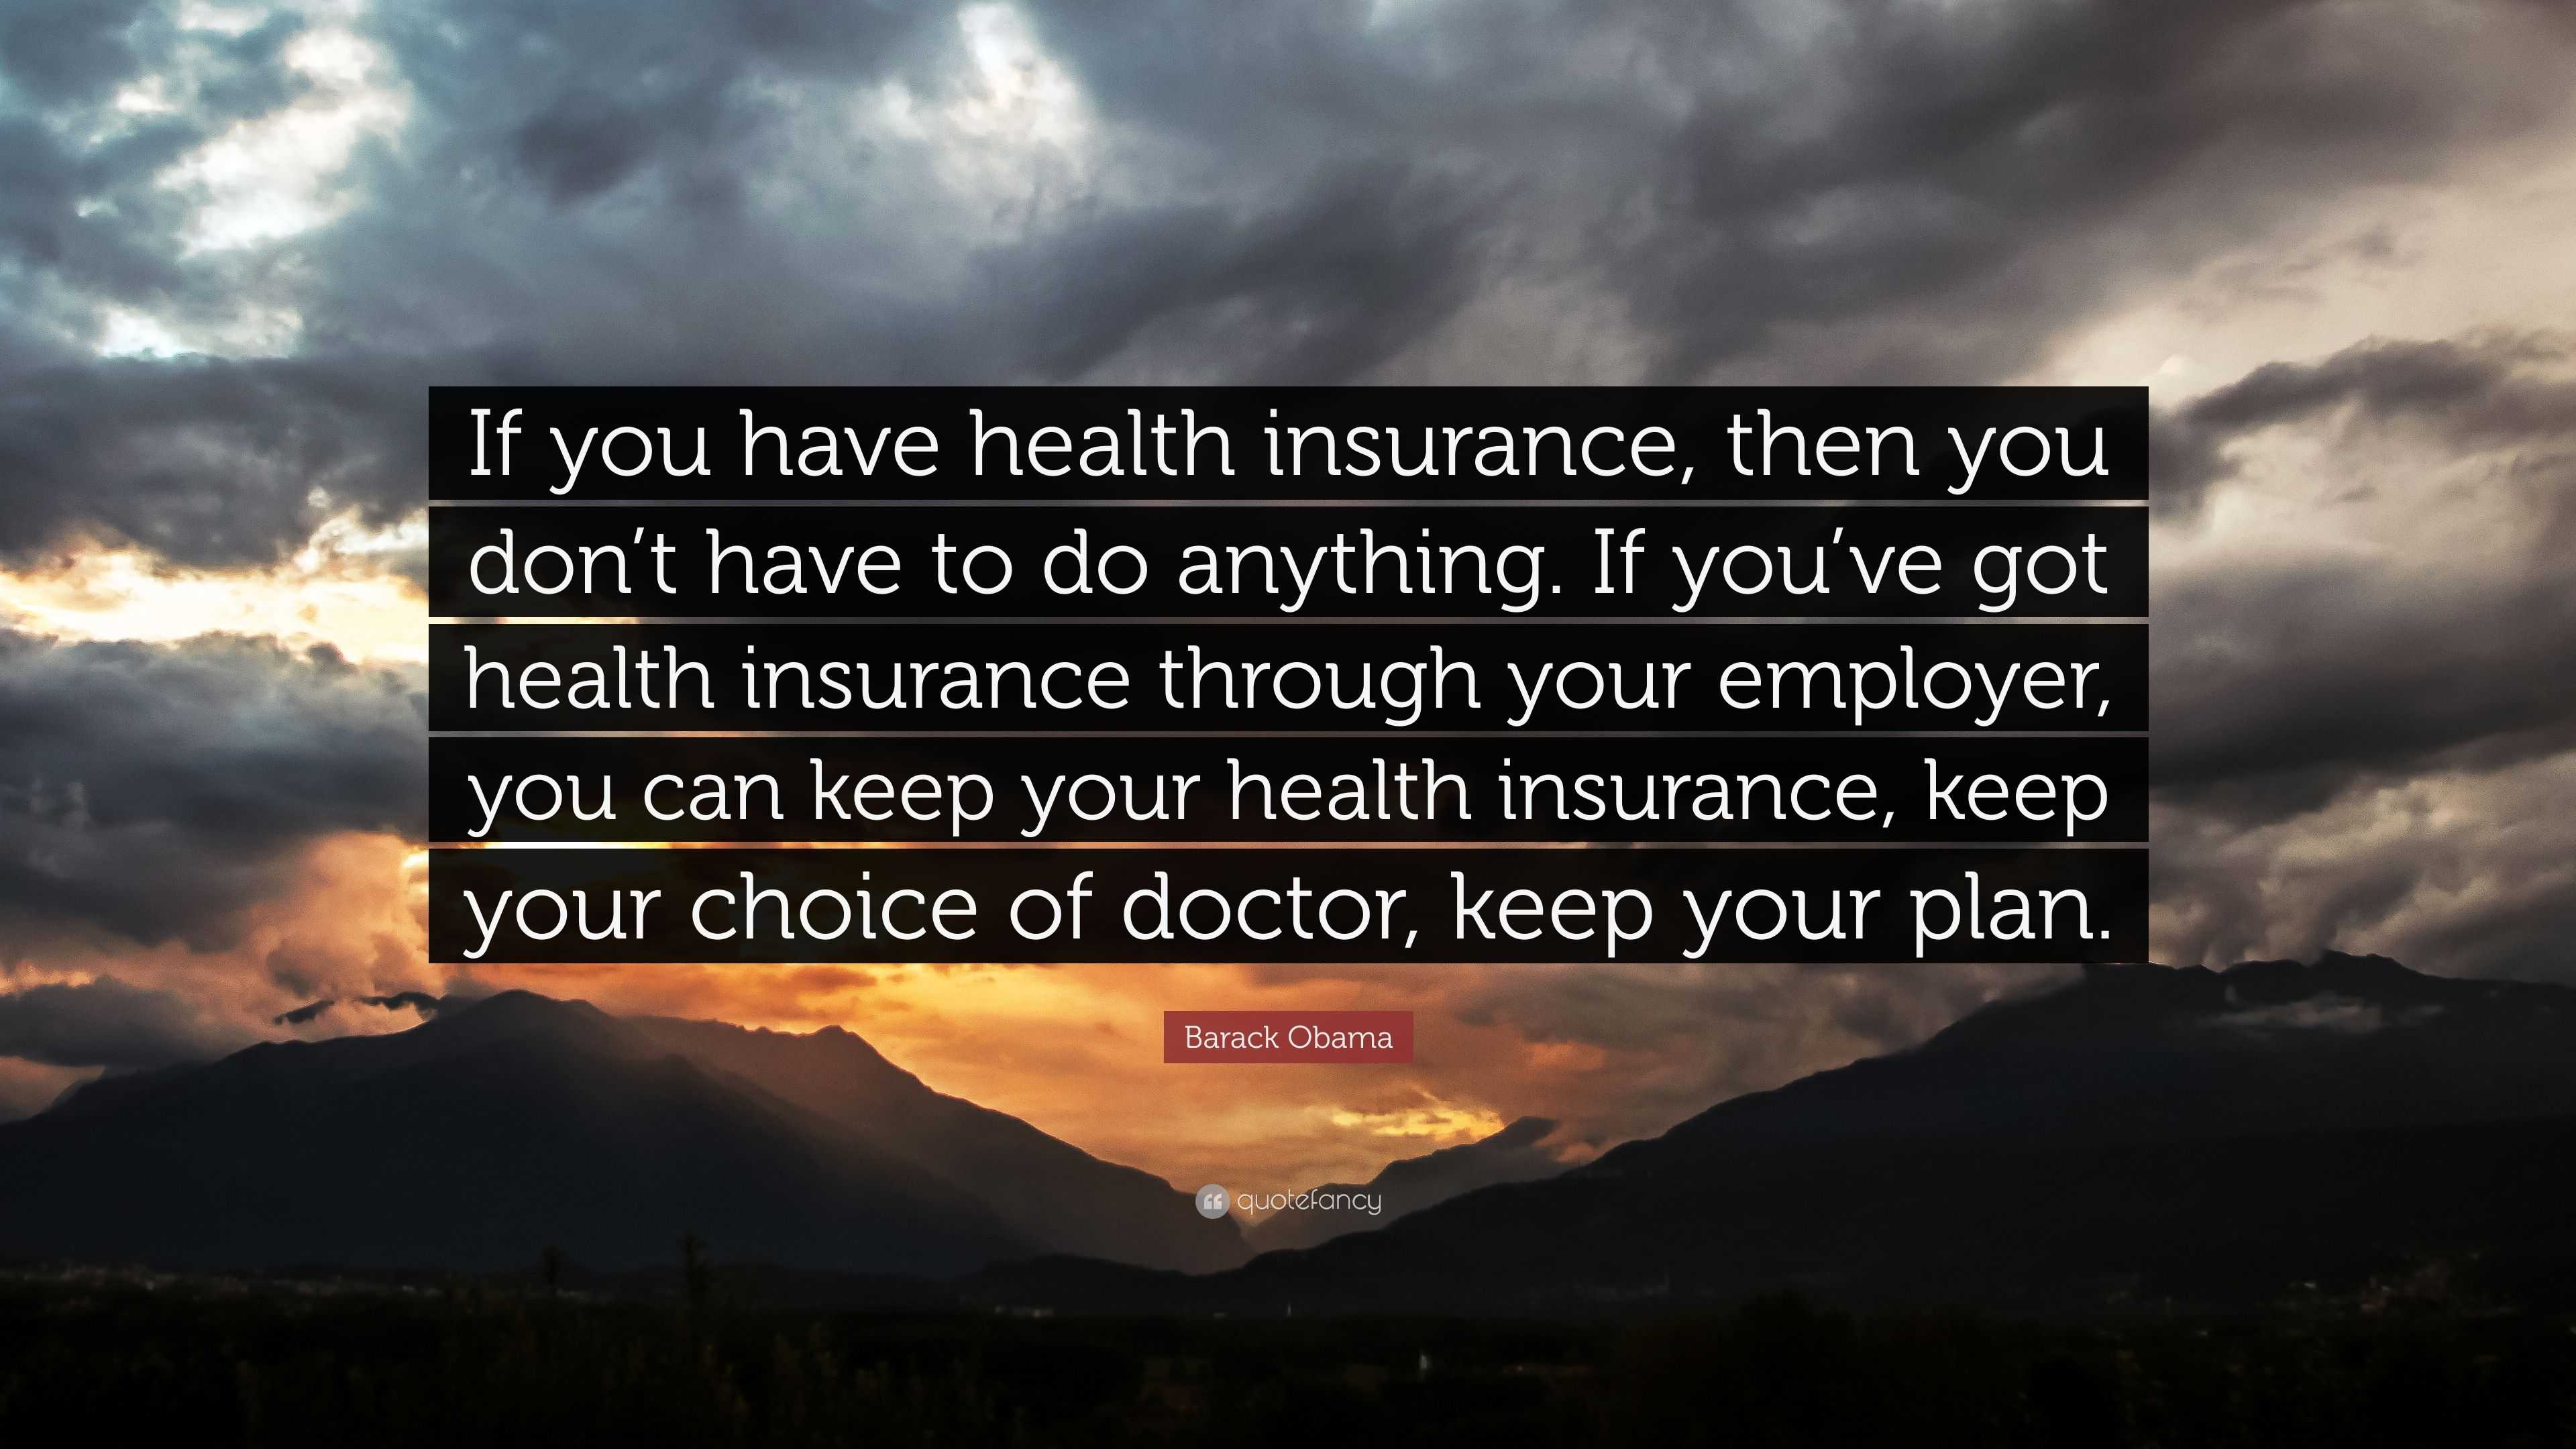 Barack Obama Quote  If you have health  insurance  then 